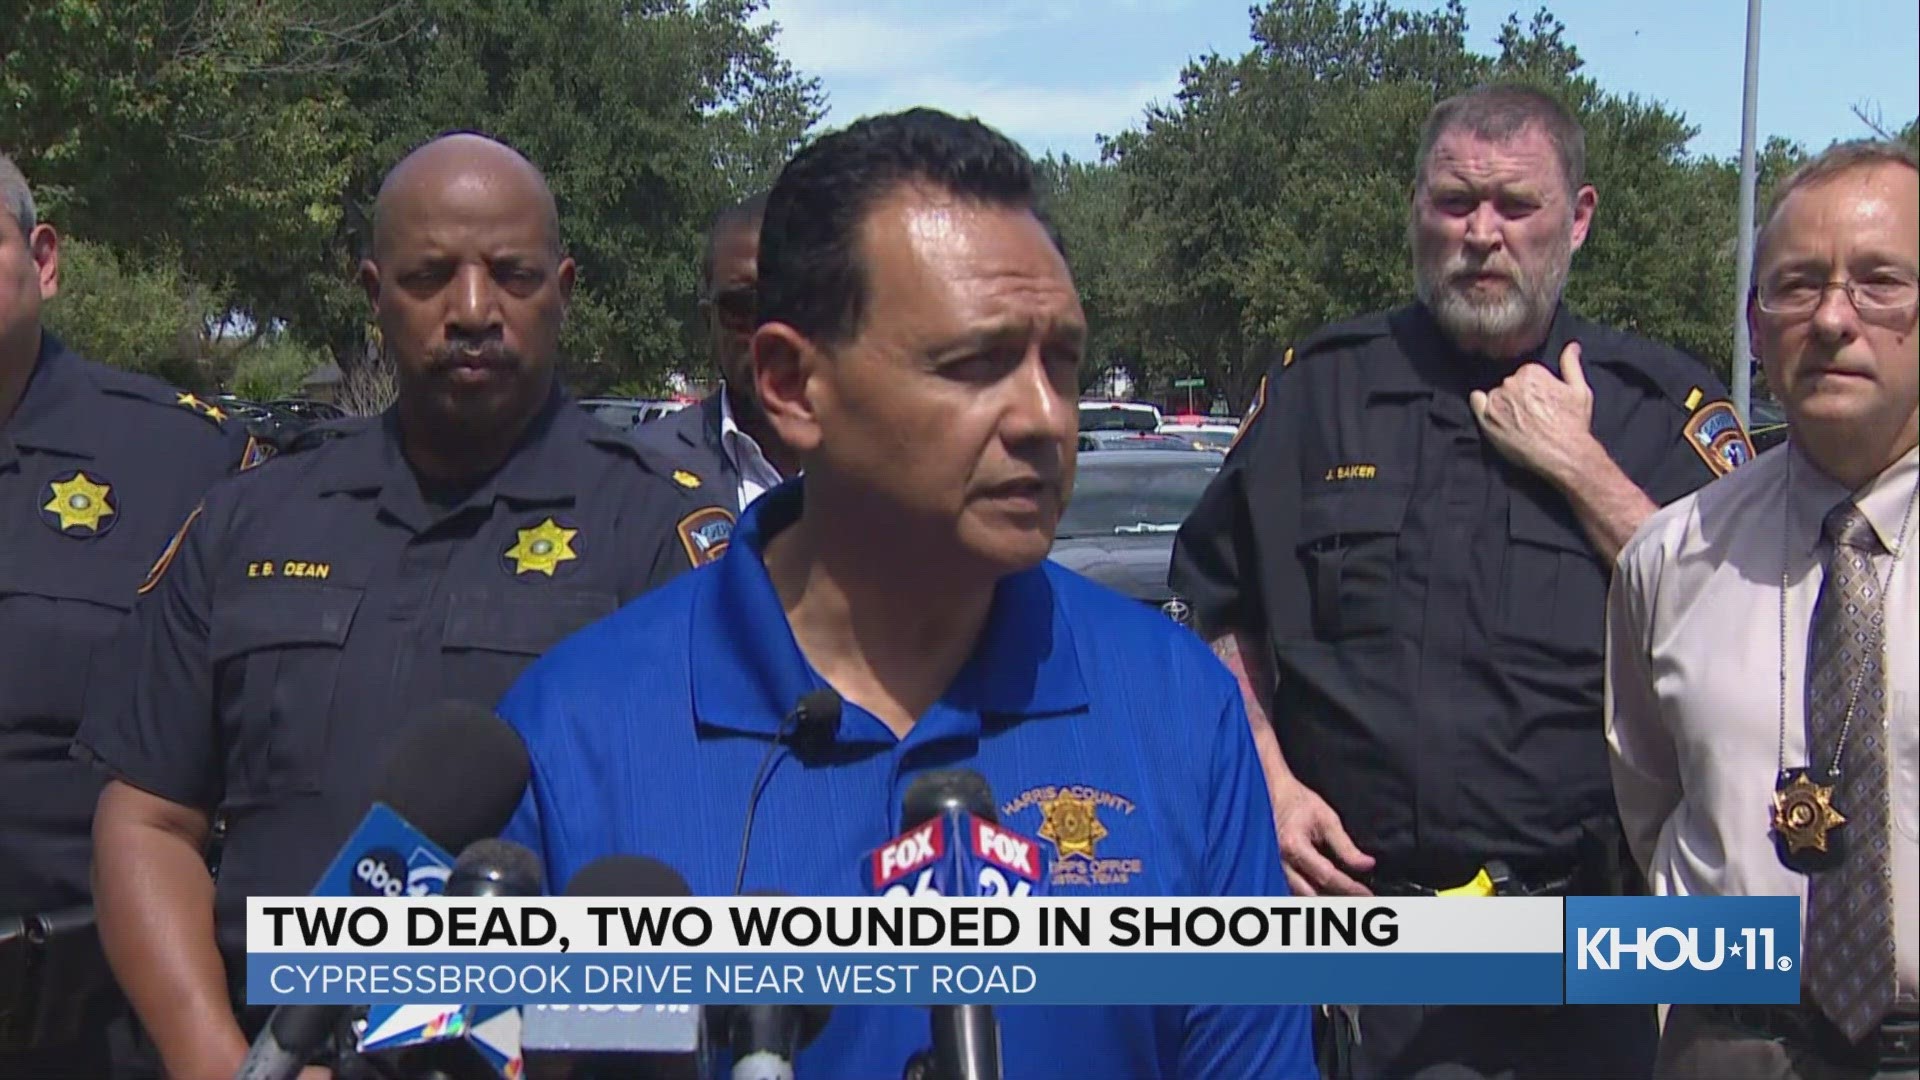 Two people were killed and two others injured in a shooting in northwest Harris County Sunday.